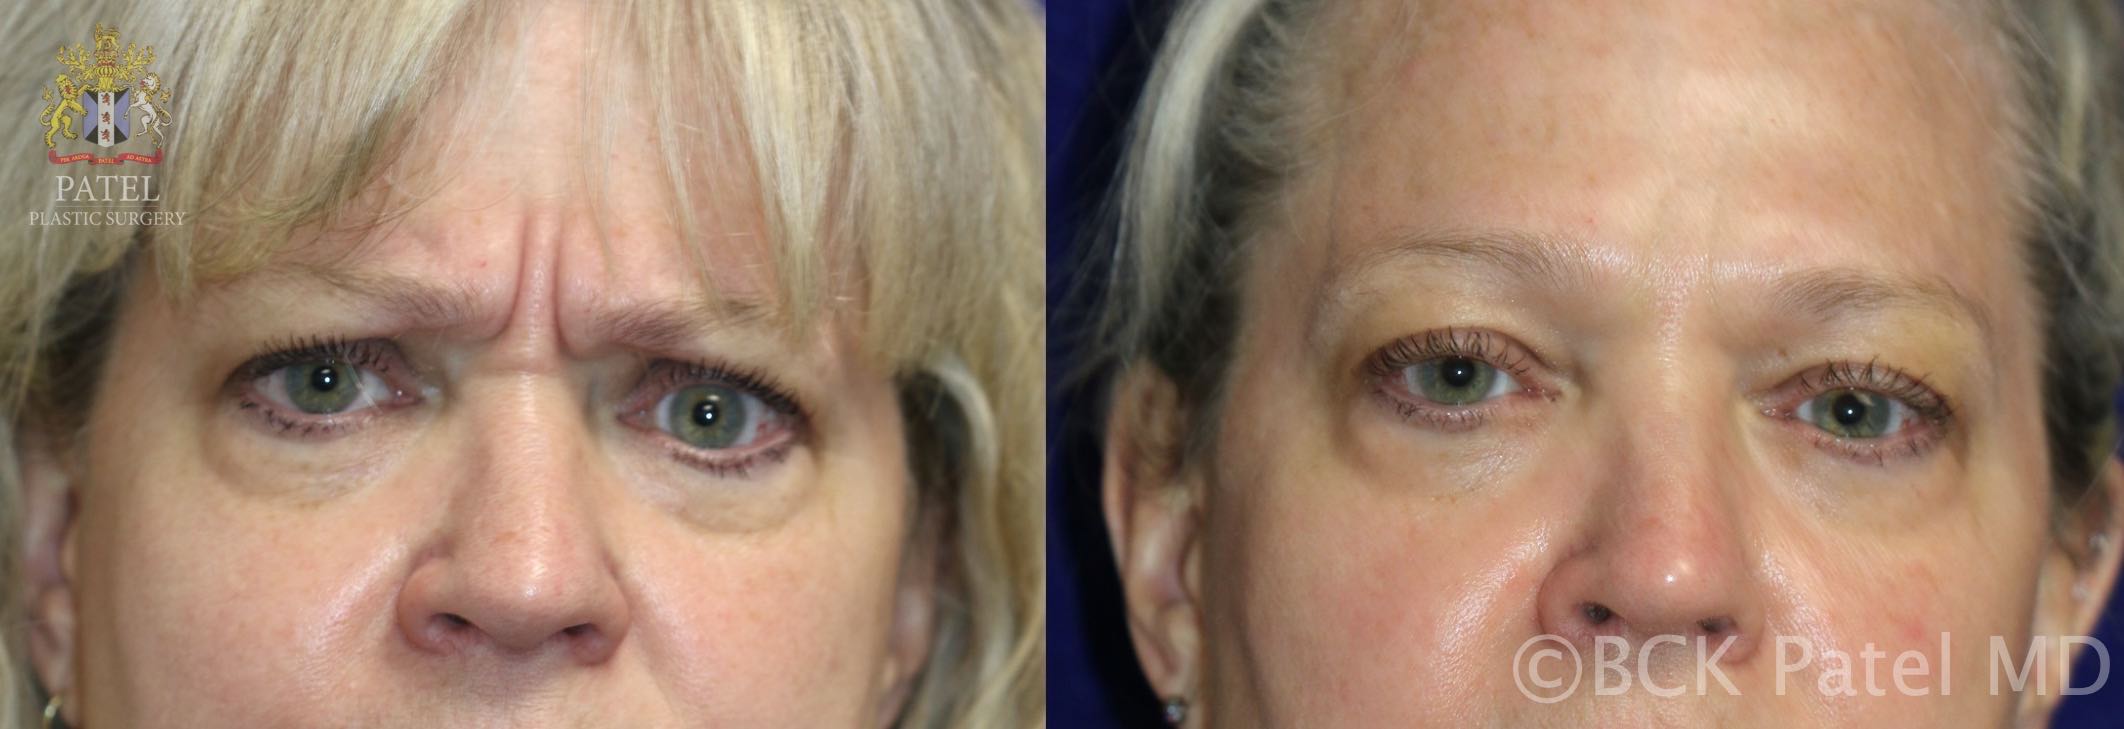 Impressive results with properly injected botox into the procerus and corrugator muscles by Dr. BCK Patel MD, FRCS